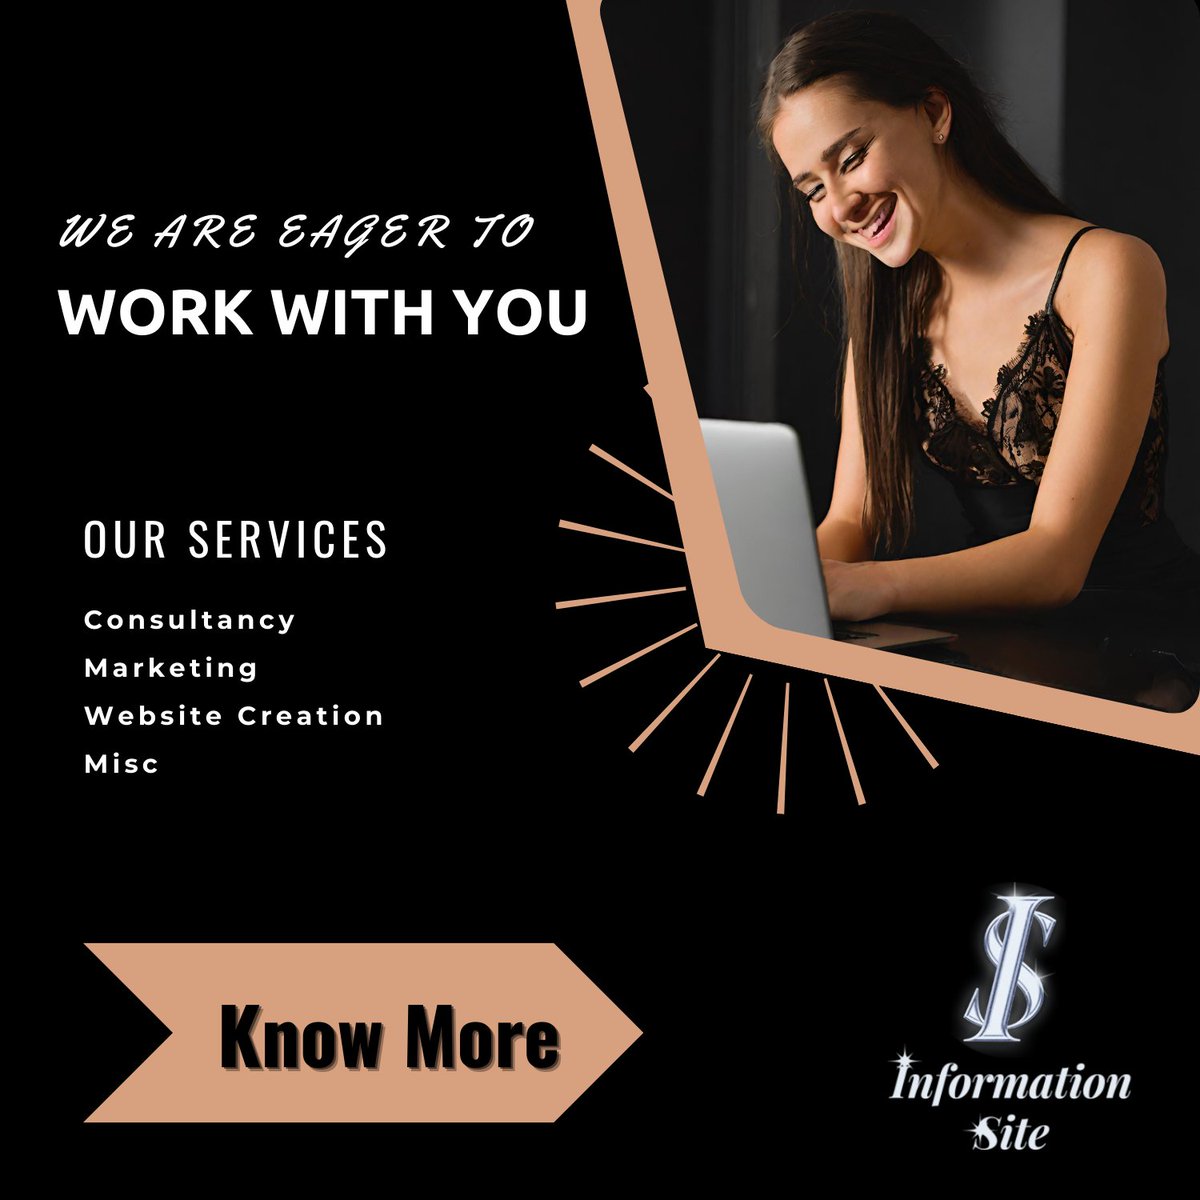 Enjoy Working with us without any tension

informationsite.in/services/

#workwithus #enjoyworking #services #ServicesOffered #digitalmarketingservices #consultancyservices #websitecreator #websiteservices #marketing #marketingadvice #healthadvice #businessadvice